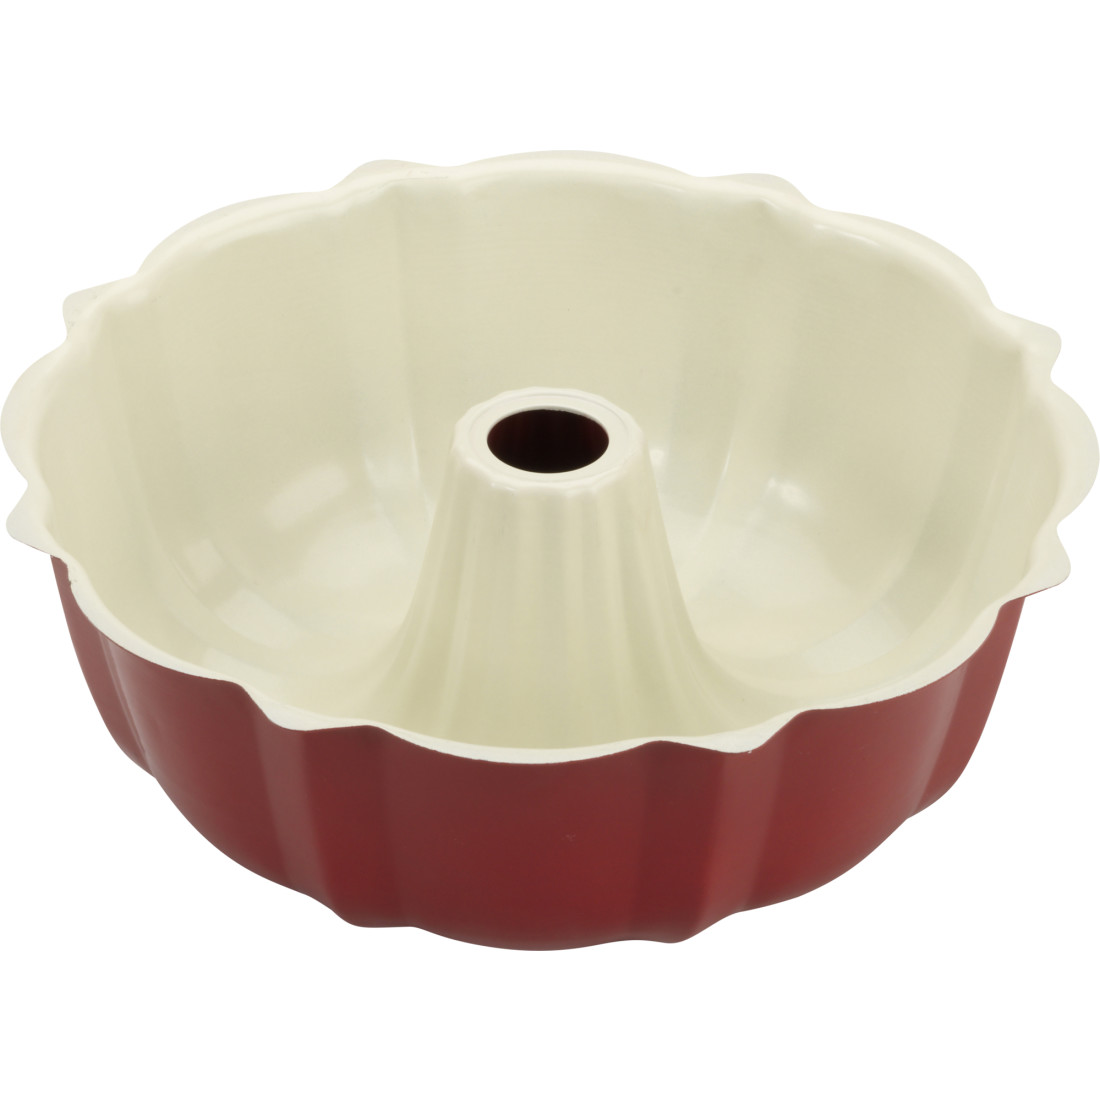 9.5-Inch Fluted Cake Pan